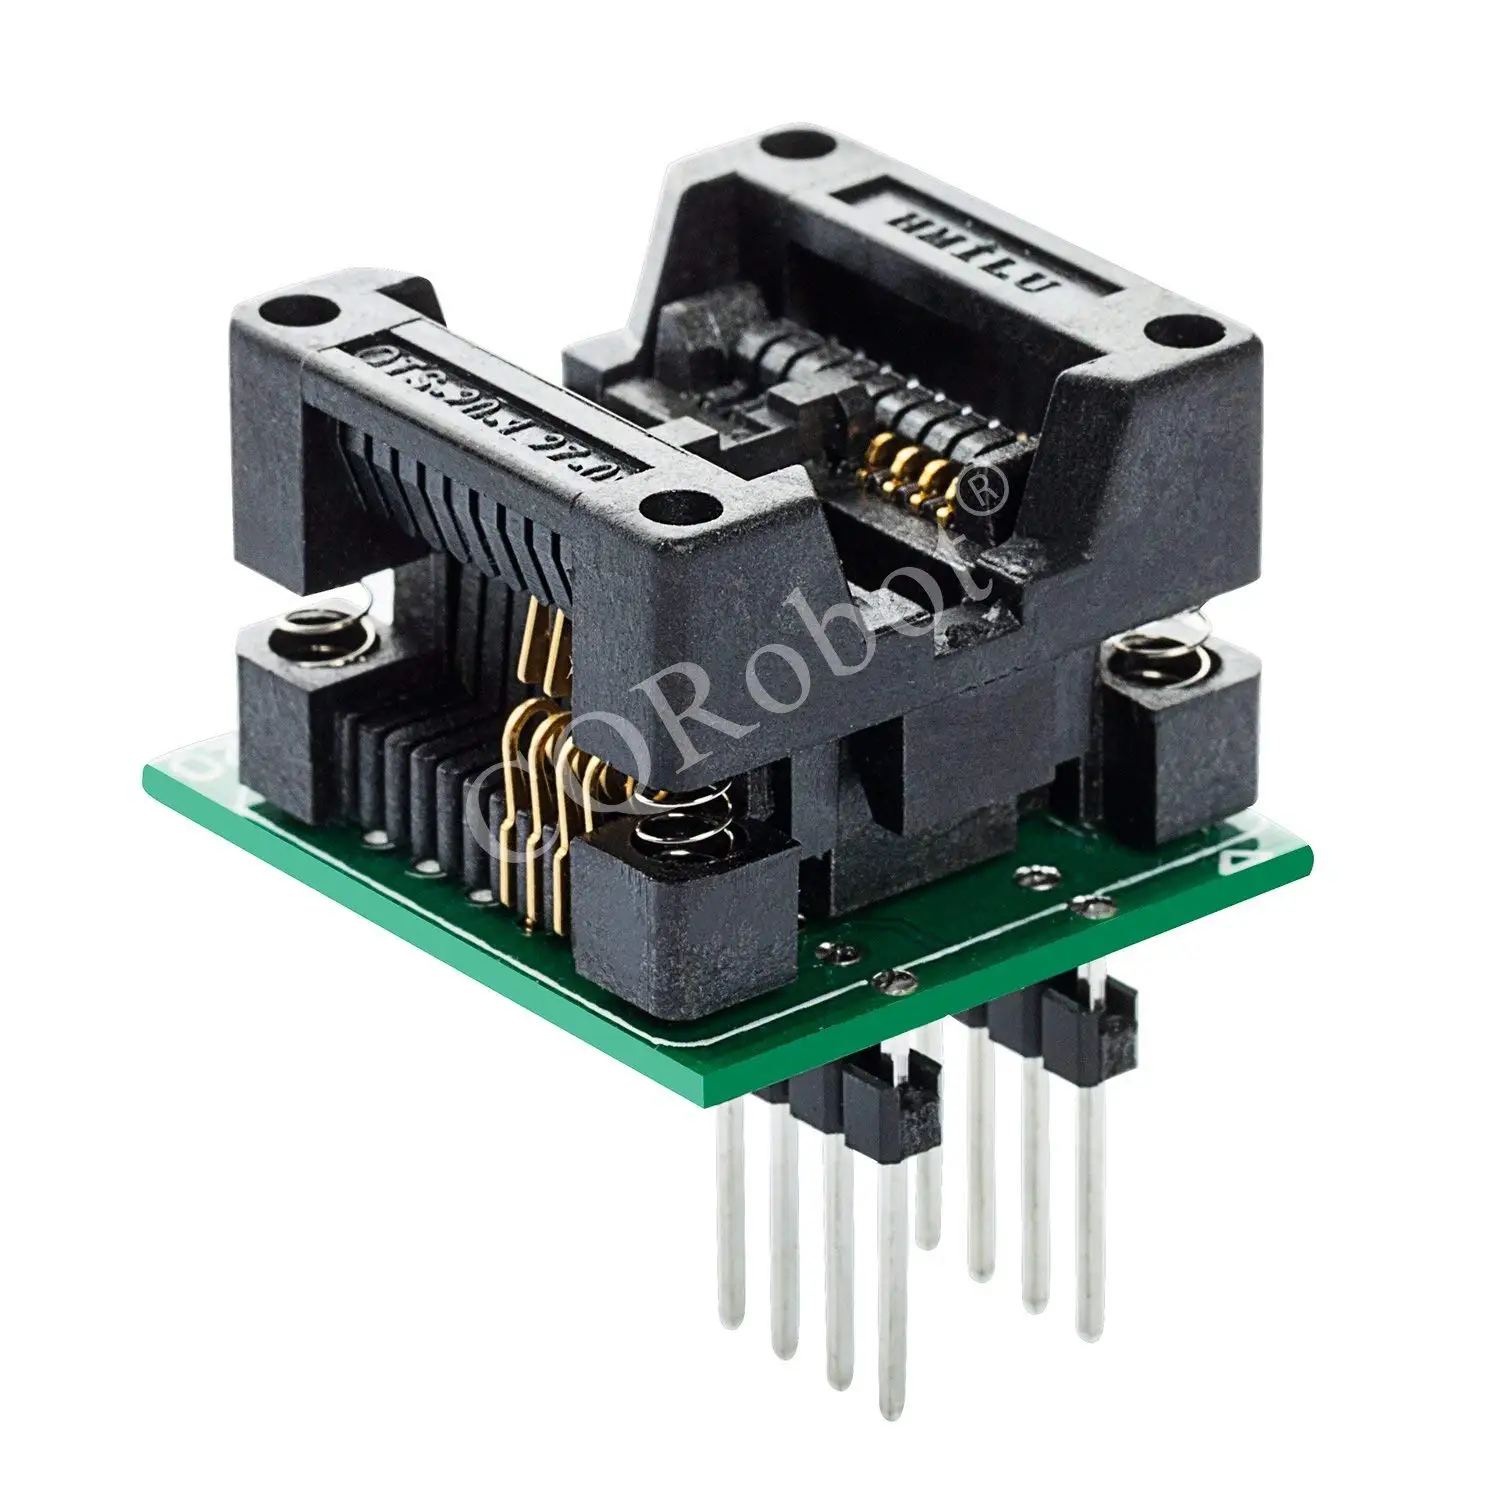 Cheap Ic Package, find Ic Package deals on line at Alibaba.com